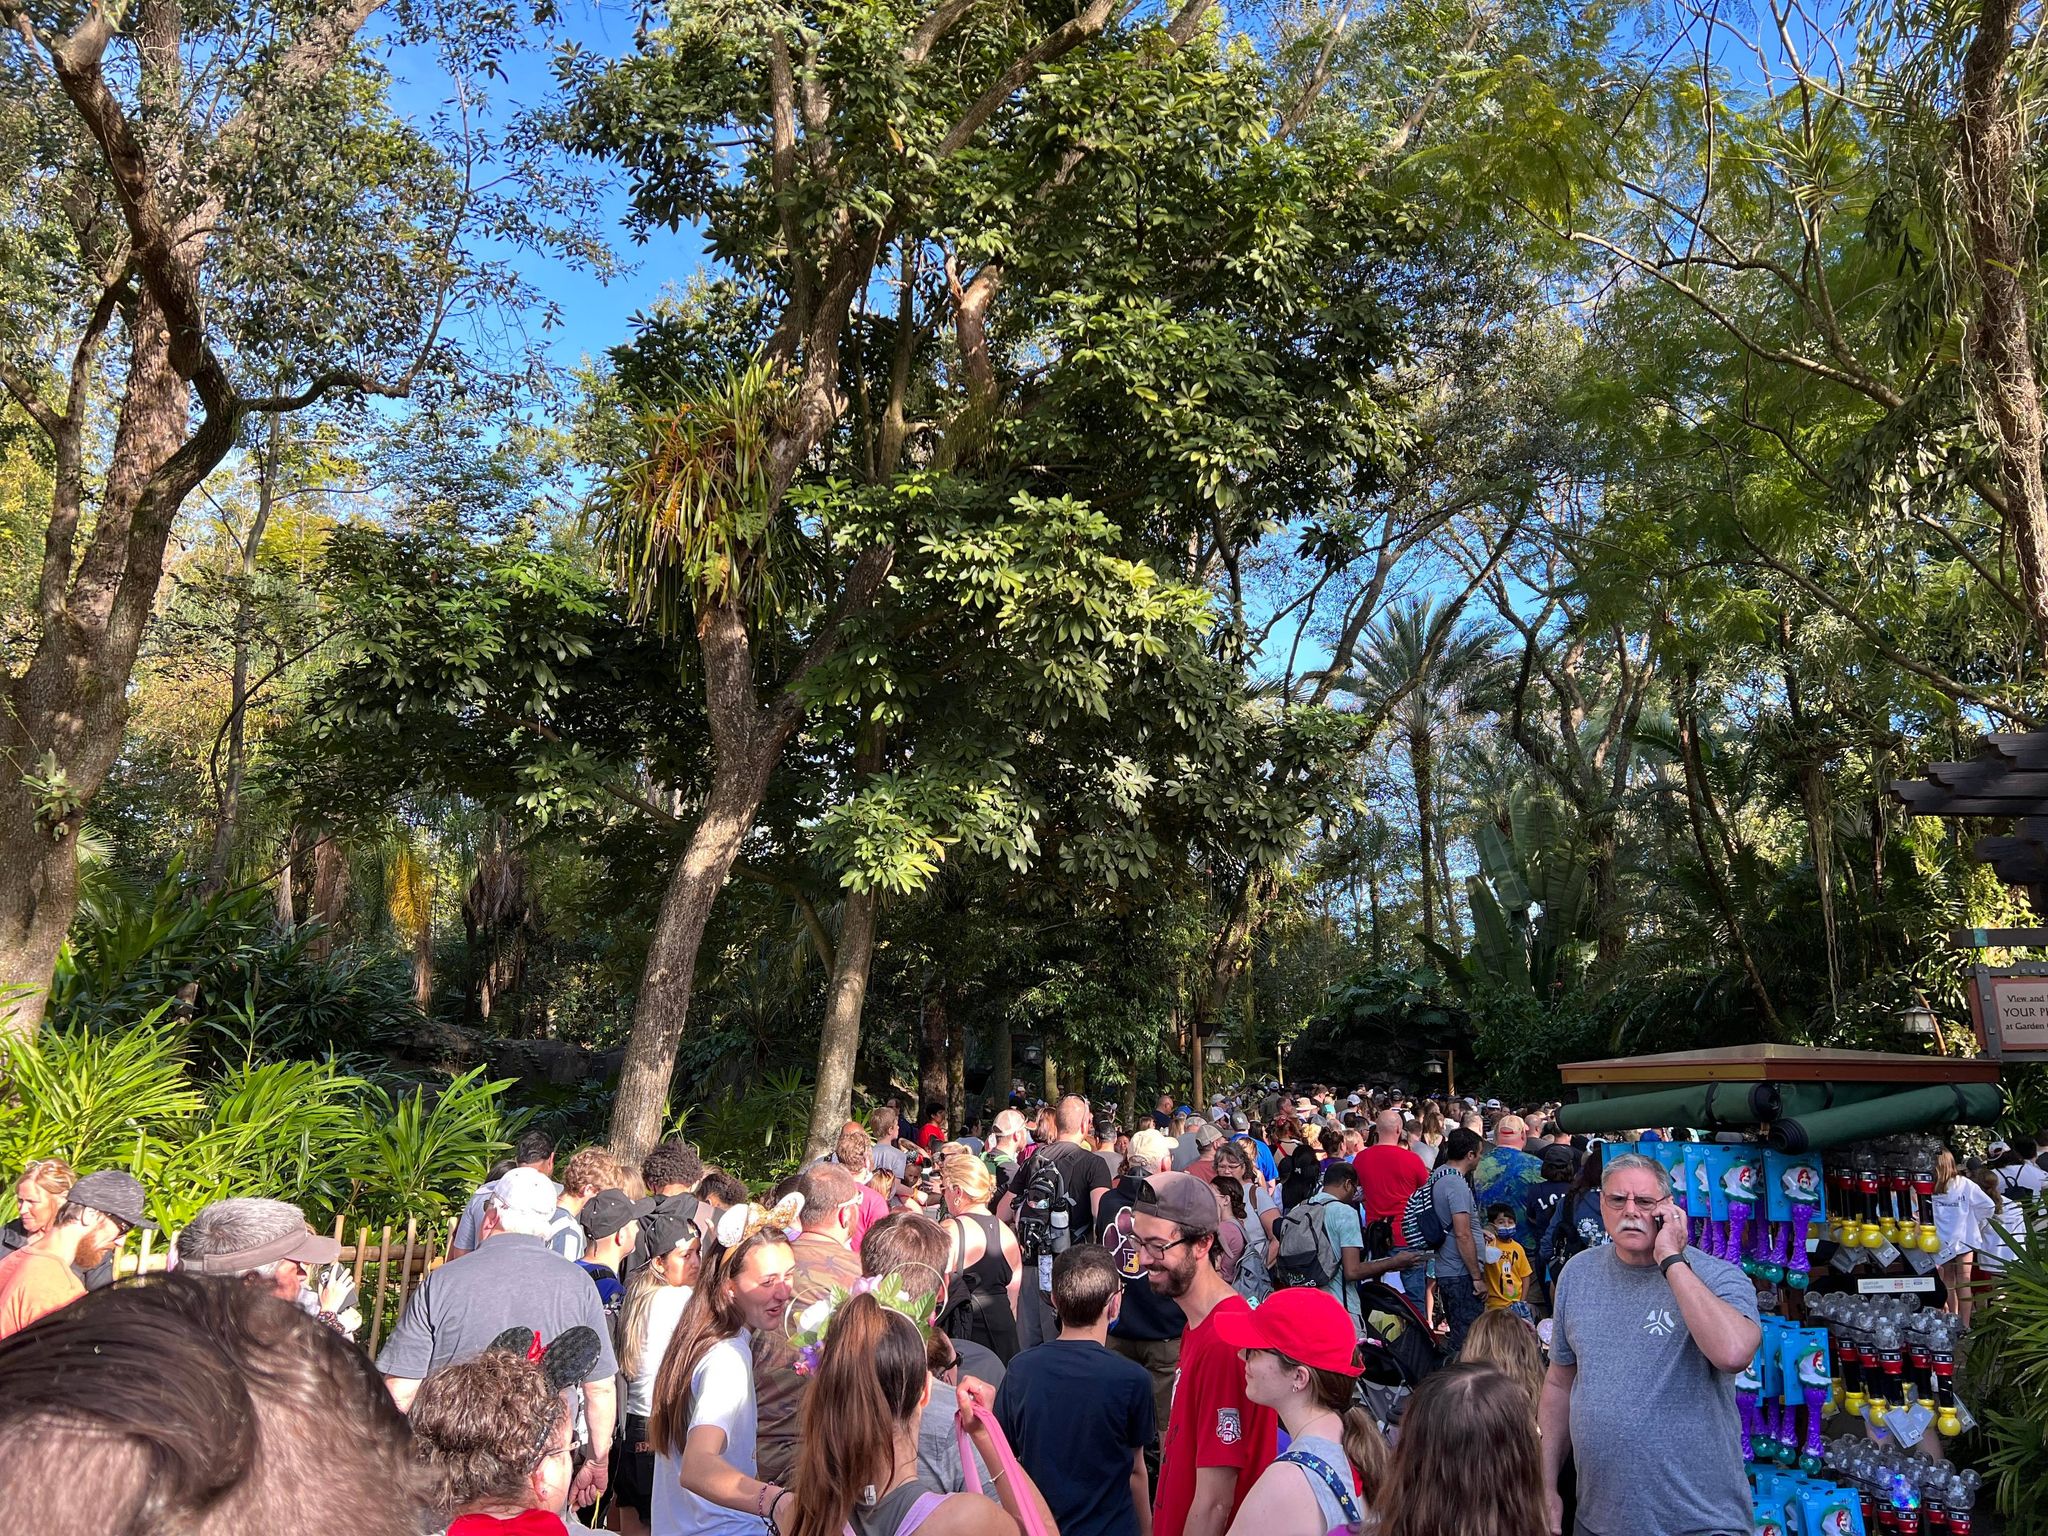 First Day of Updated Mask Rules at Disney's Animal Kingdom 